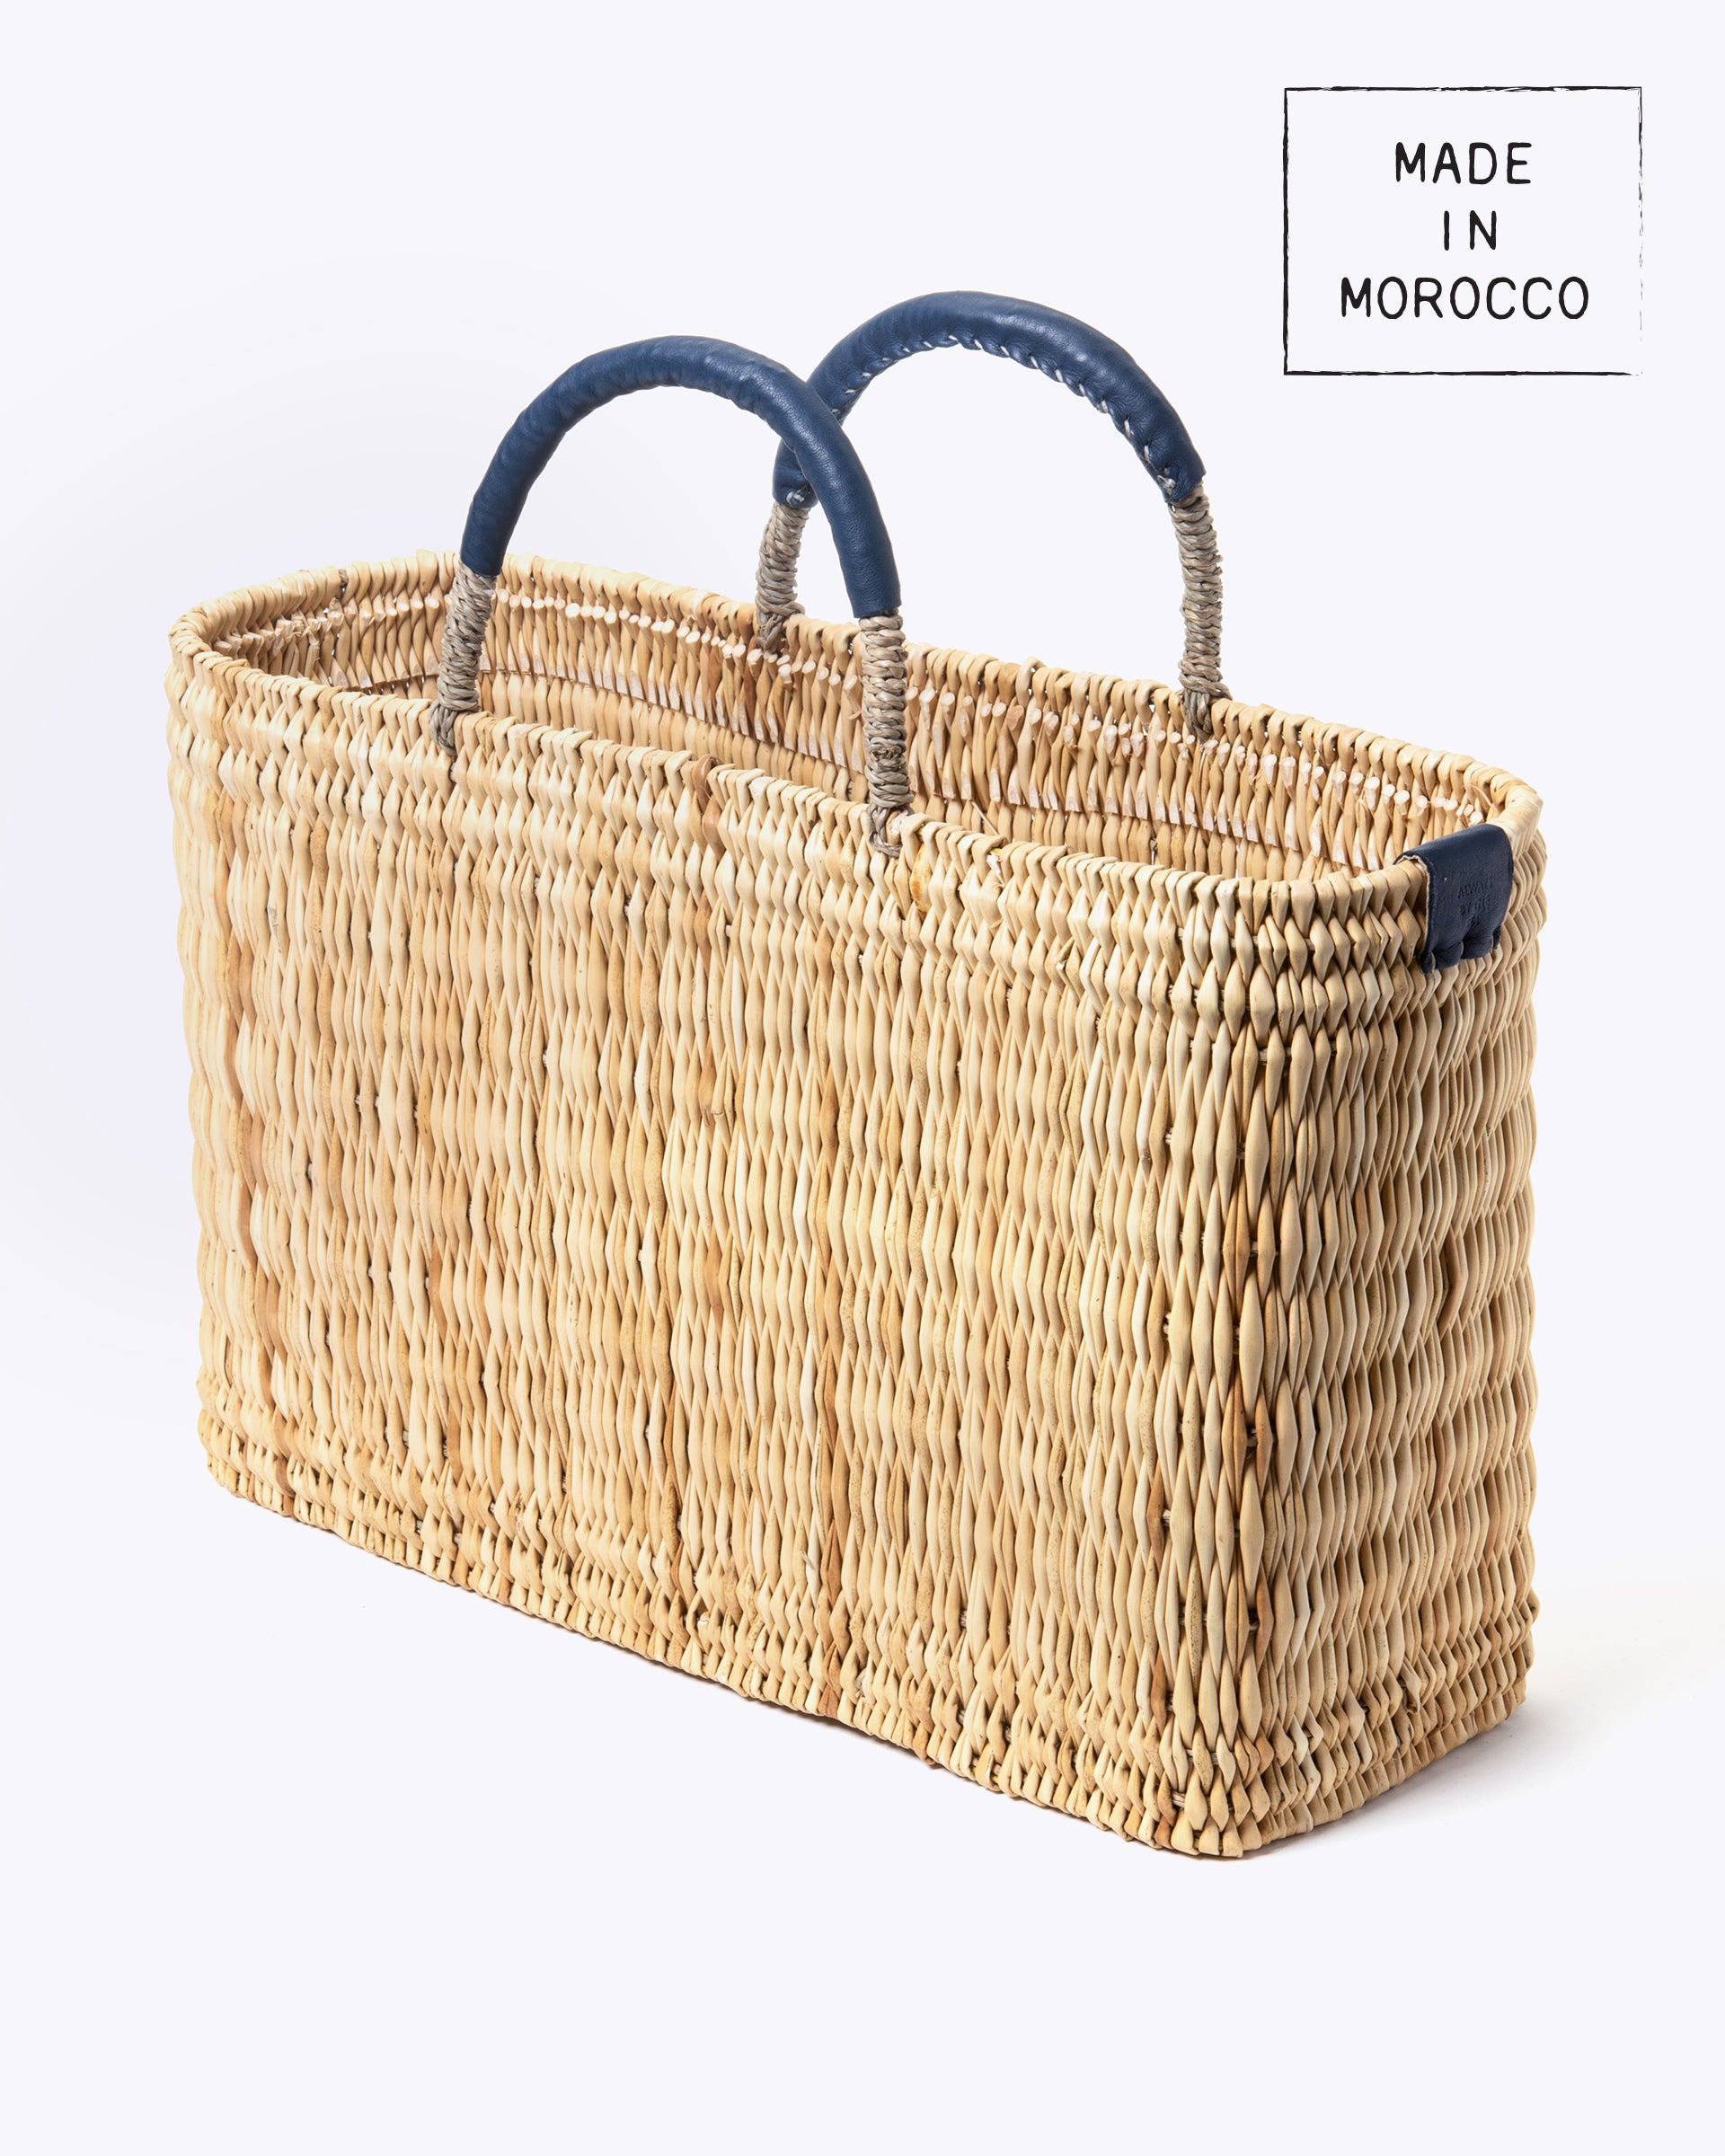  FRENCH BASKET straw bag with leather handles, beach bag, straw  bag, market basket, shopping basket, wicker basket with handle, wicker  basket : Handmade Products